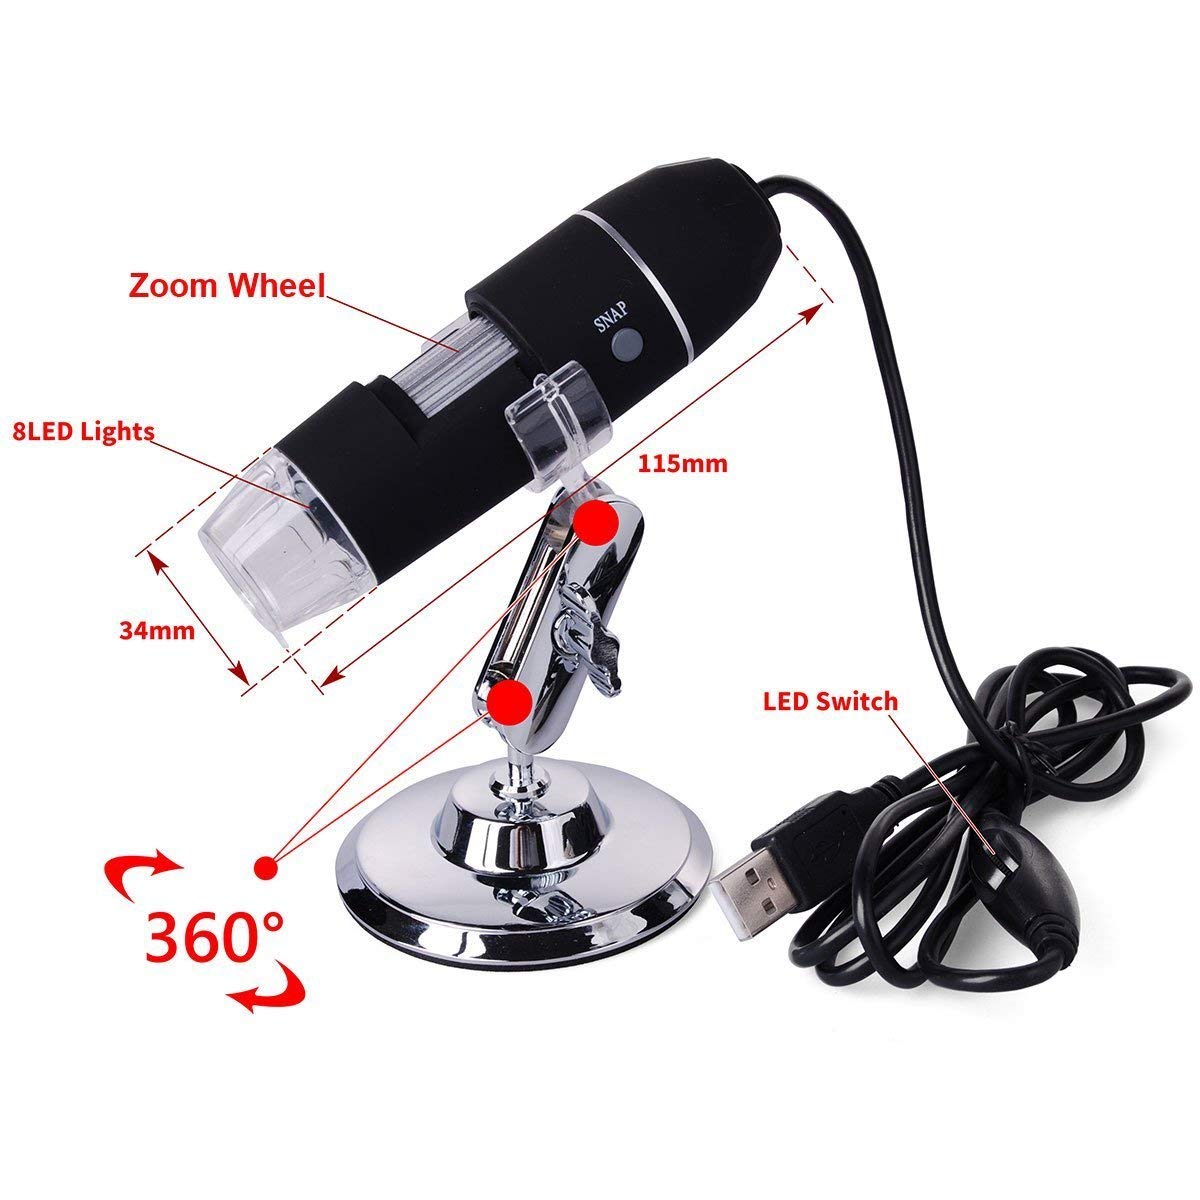 driver for snap science usb digital microscope